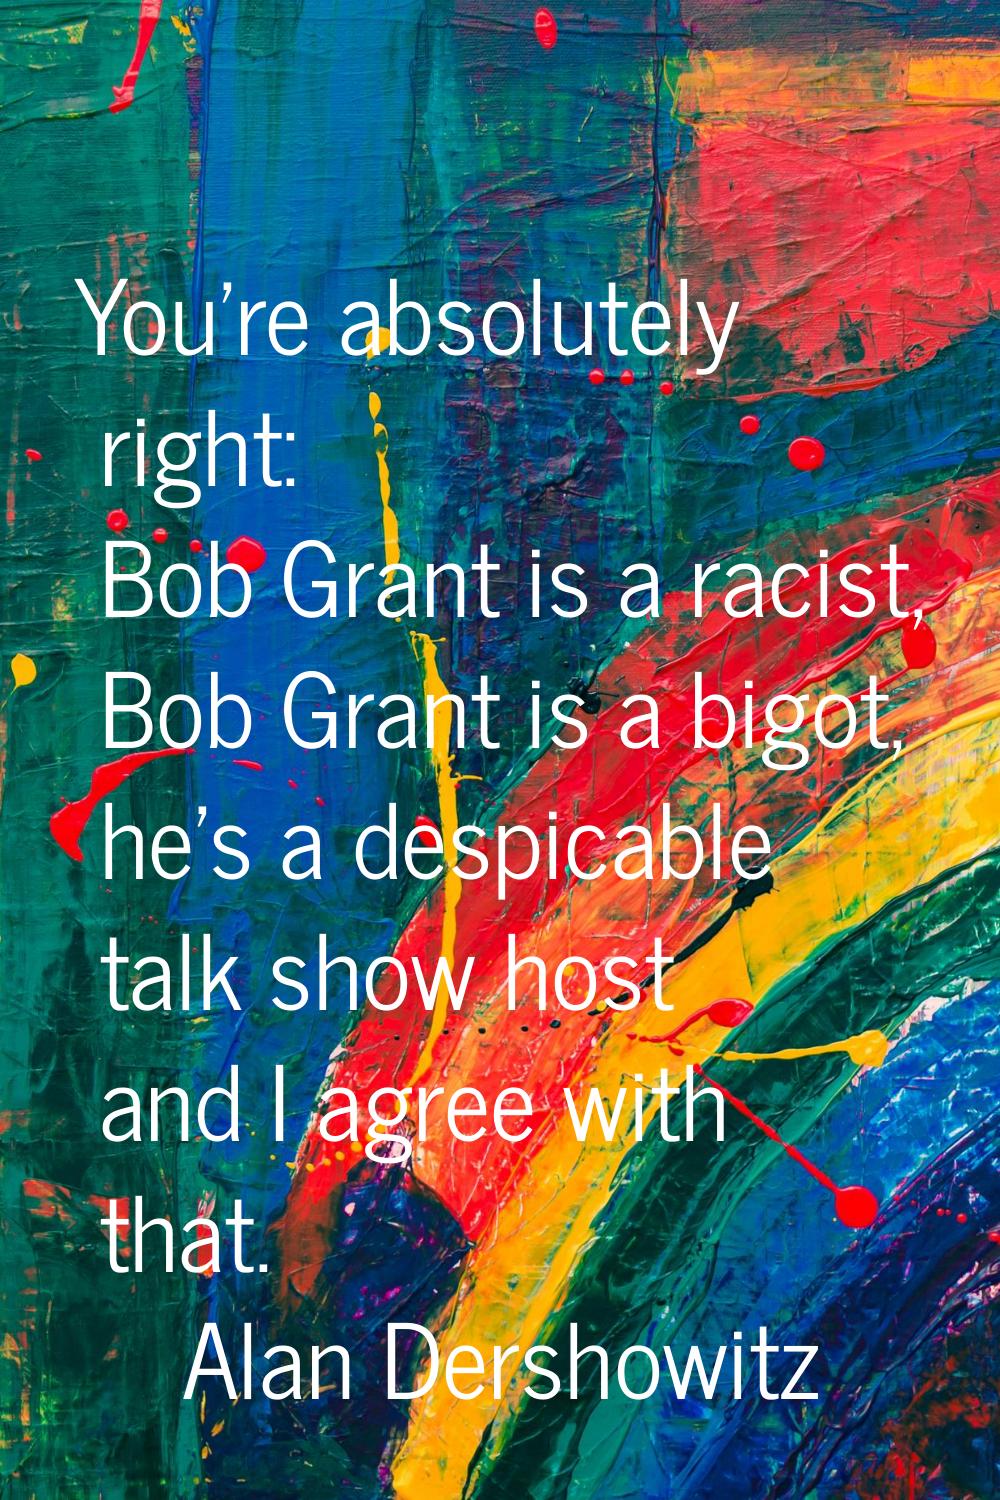 You're absolutely right: Bob Grant is a racist, Bob Grant is a bigot, he's a despicable talk show h